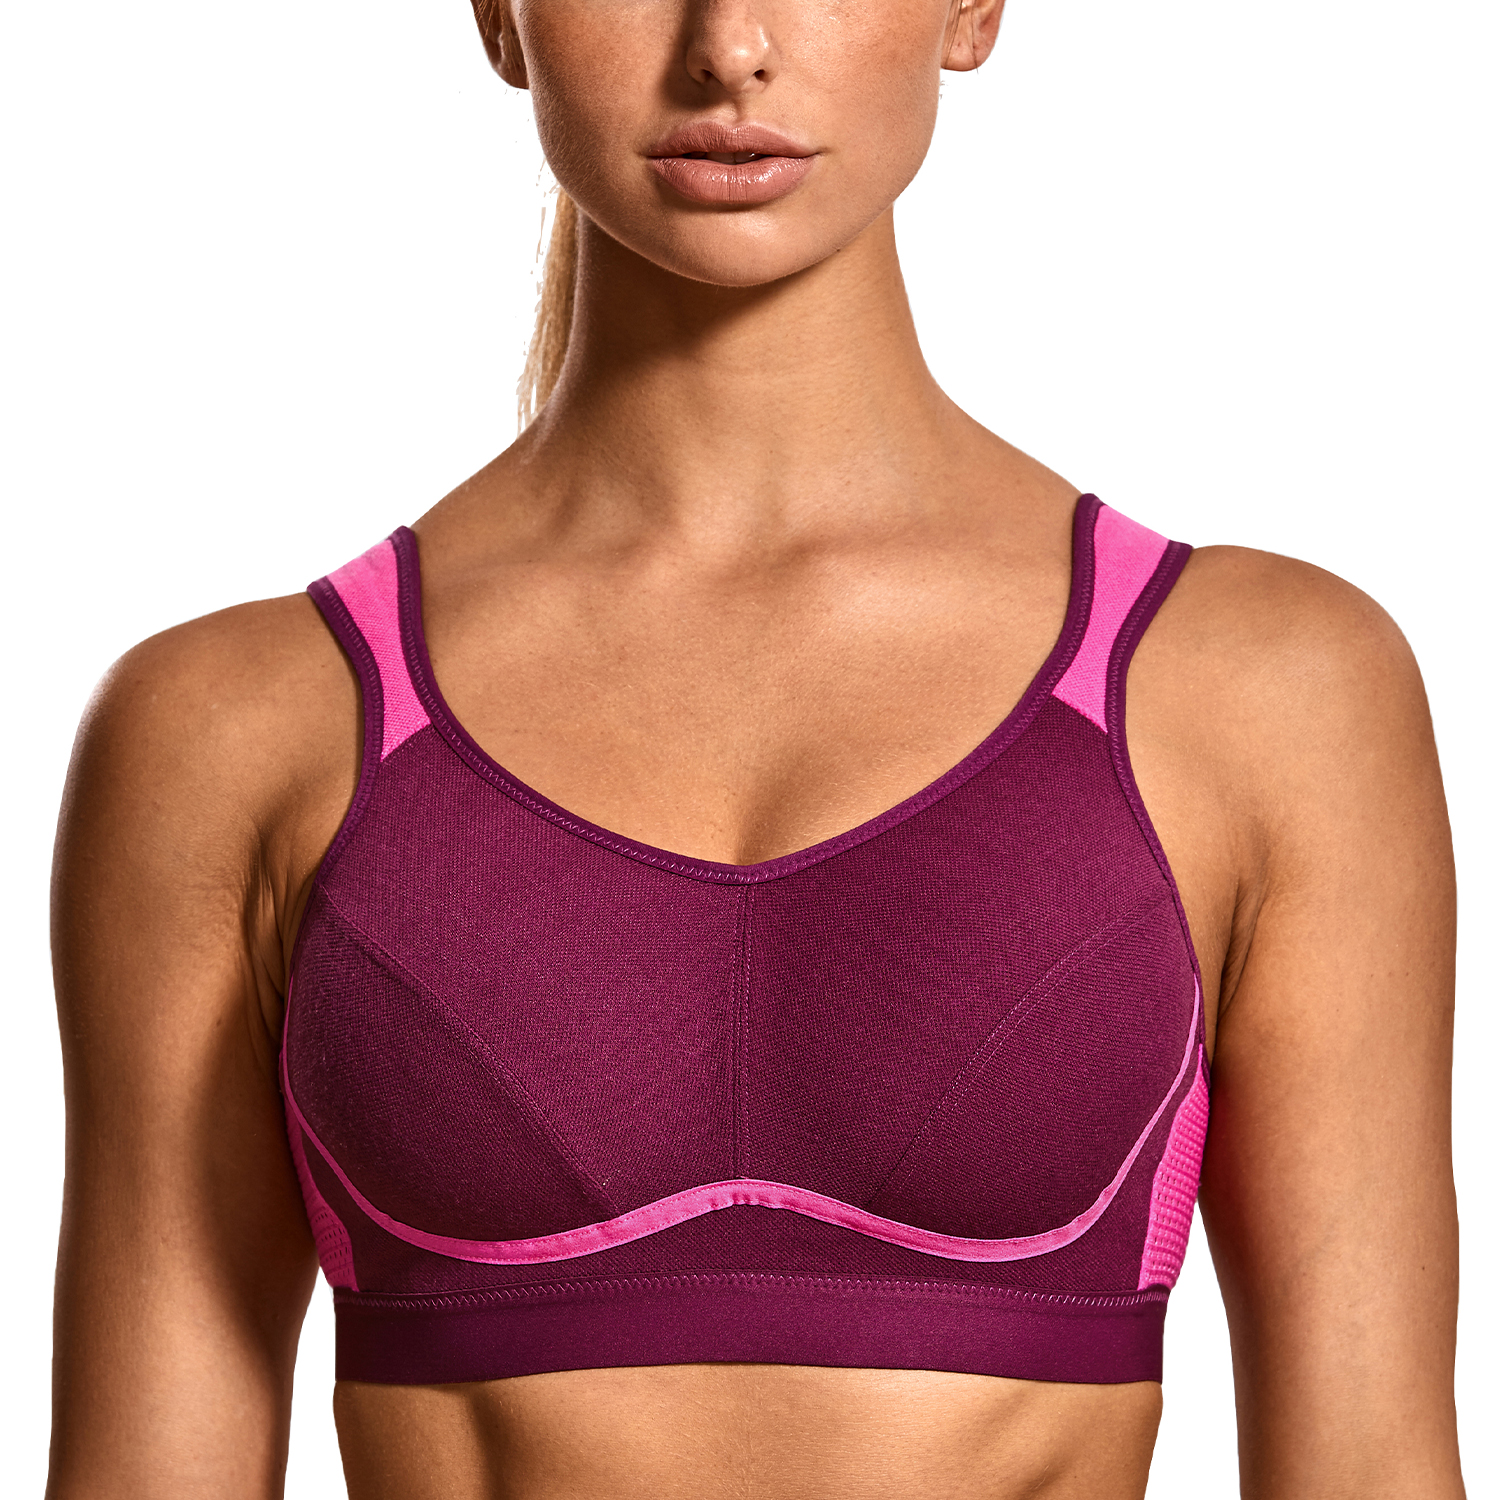 SYROKAN Sports Bra High Impact Support Bra Wirefree Bounce Control